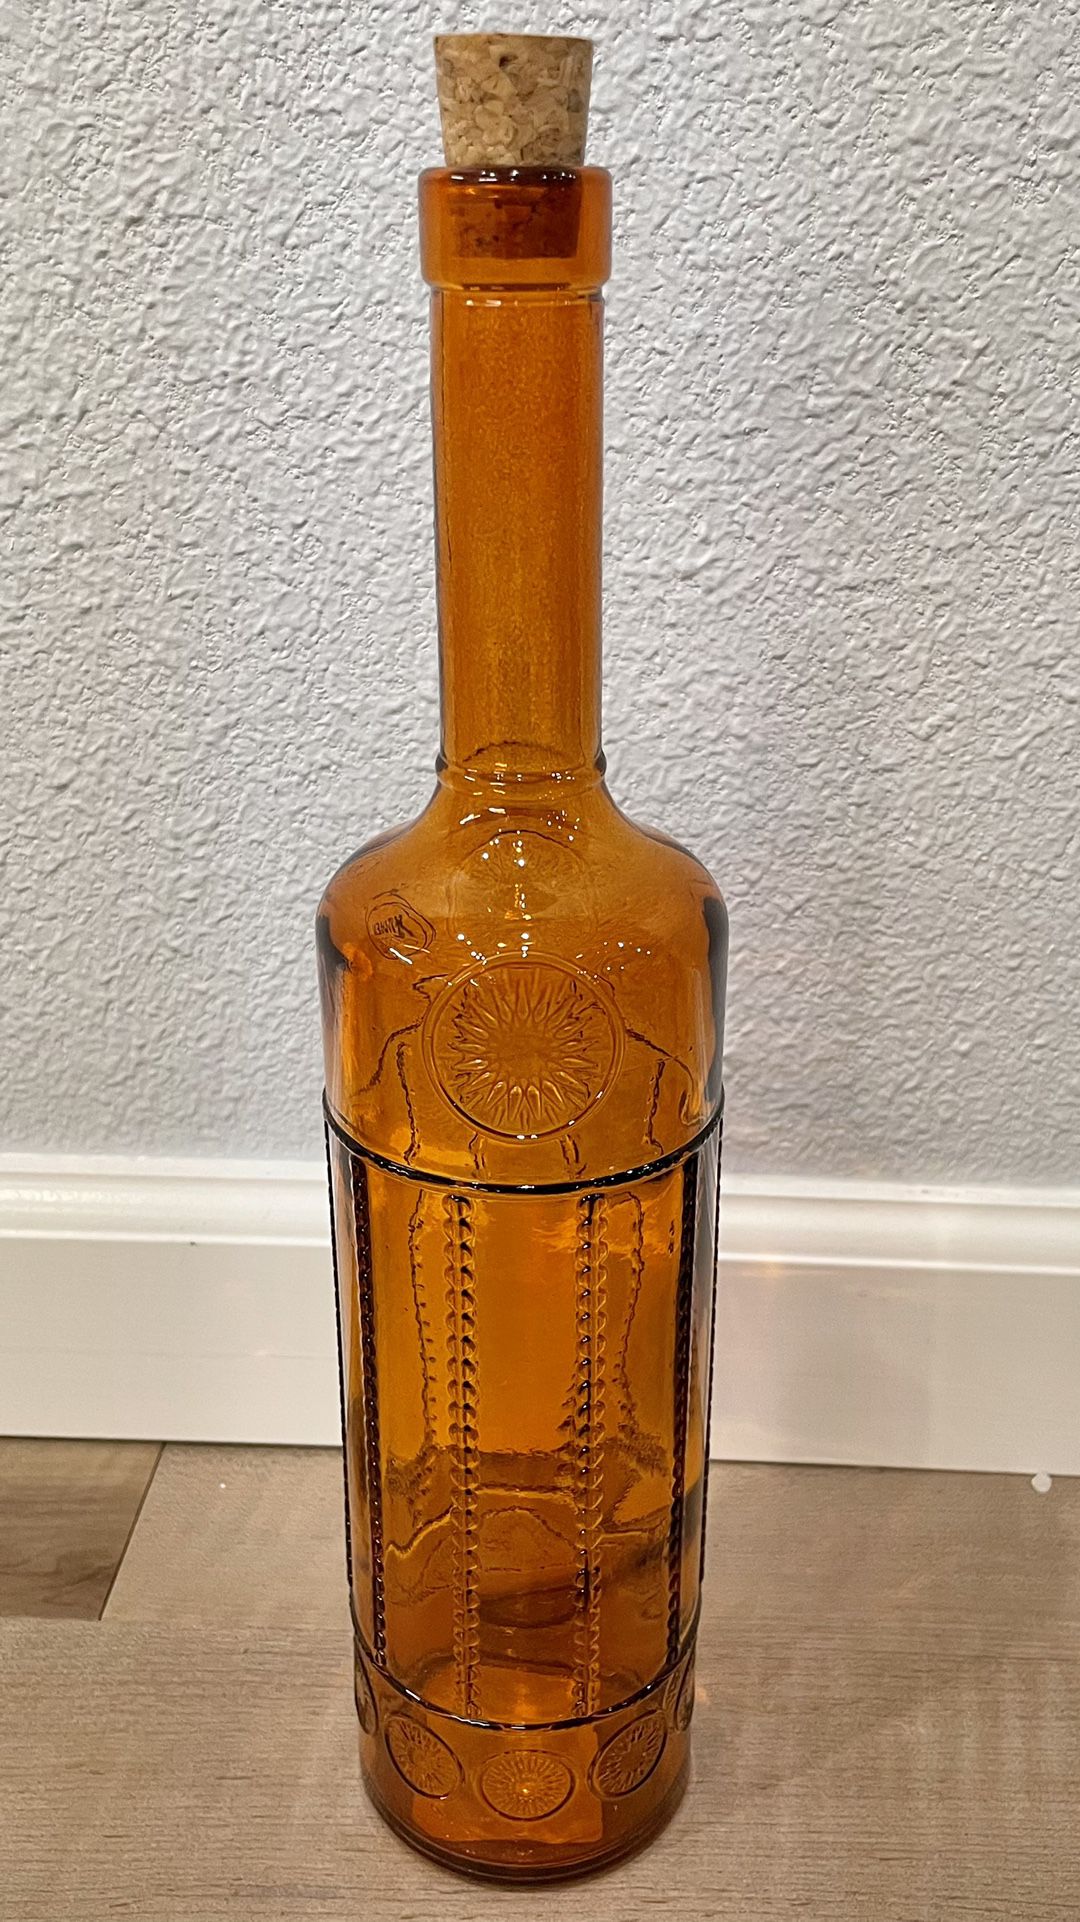 Rust Colored Stained Glass Bottle (Vintage Looking)